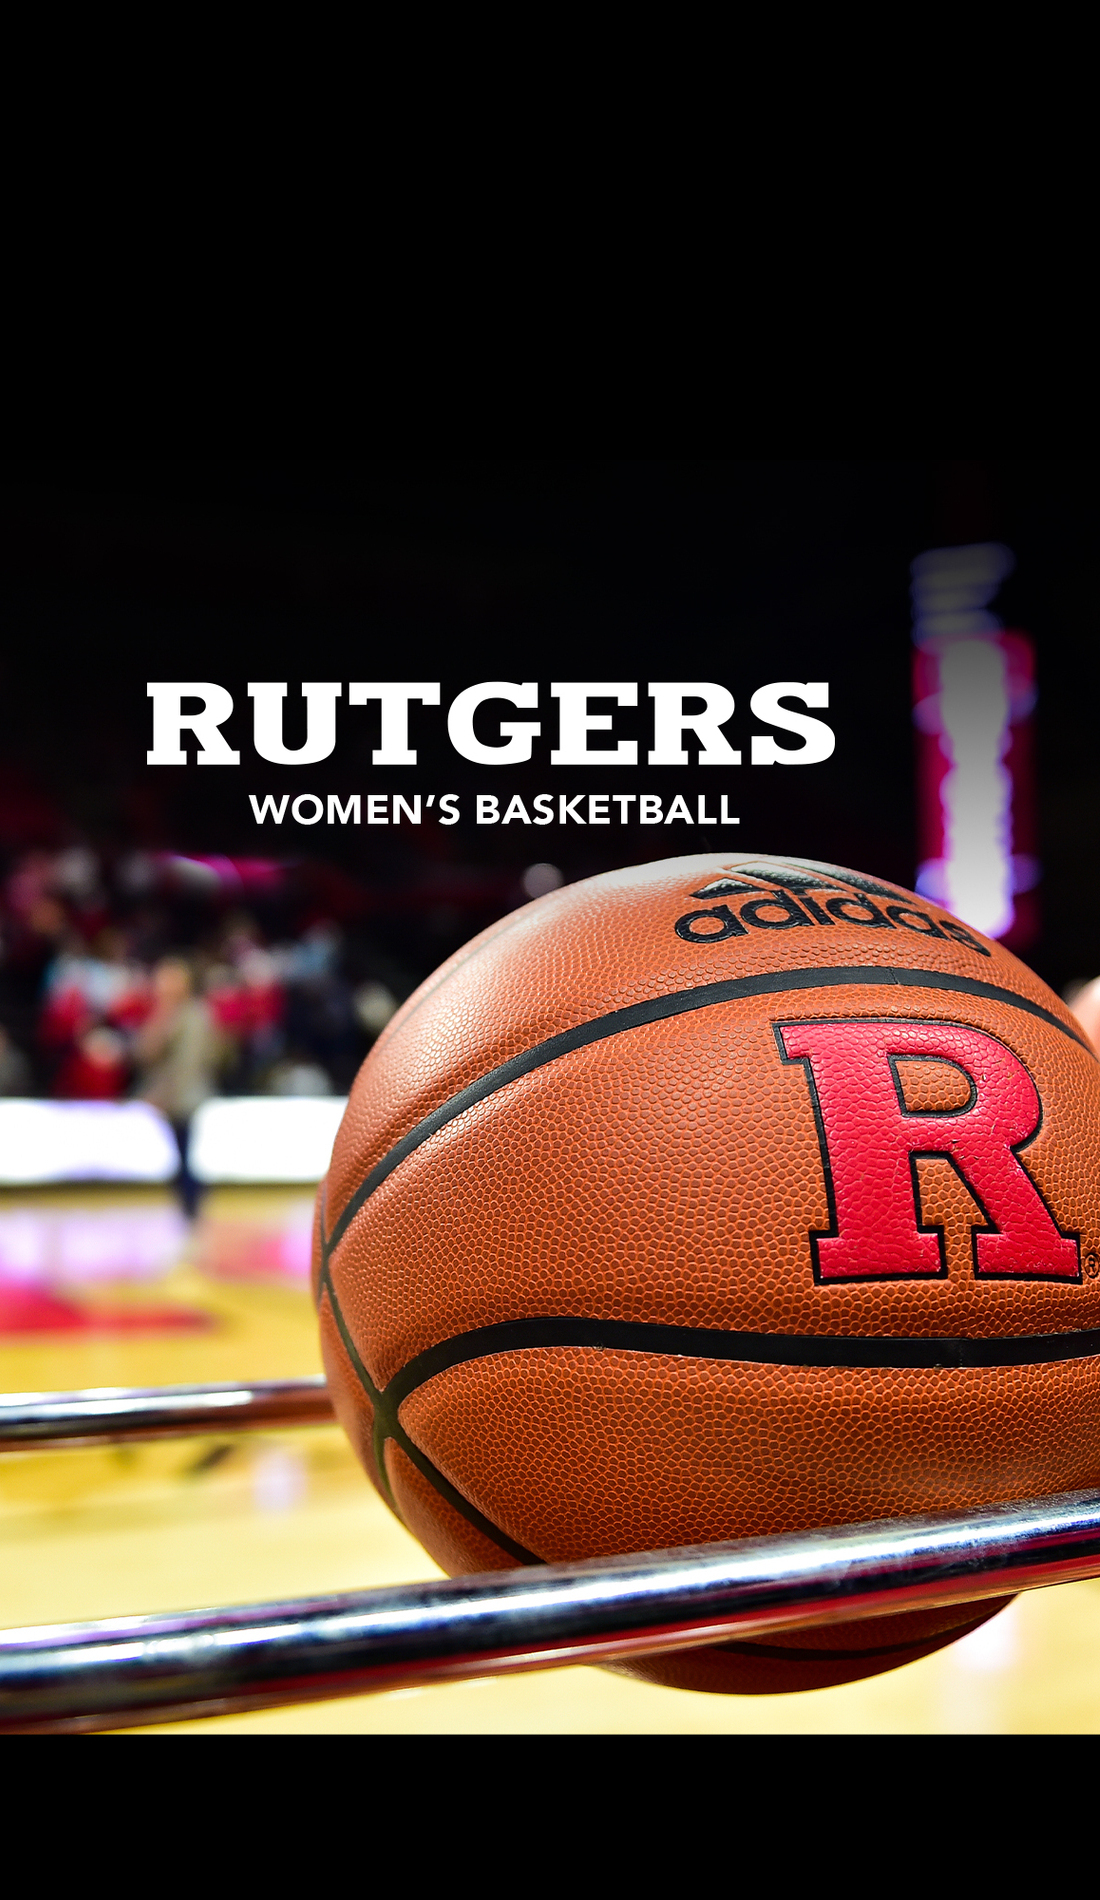 A Rutgers Scarlet Knights Womens Basketball live event